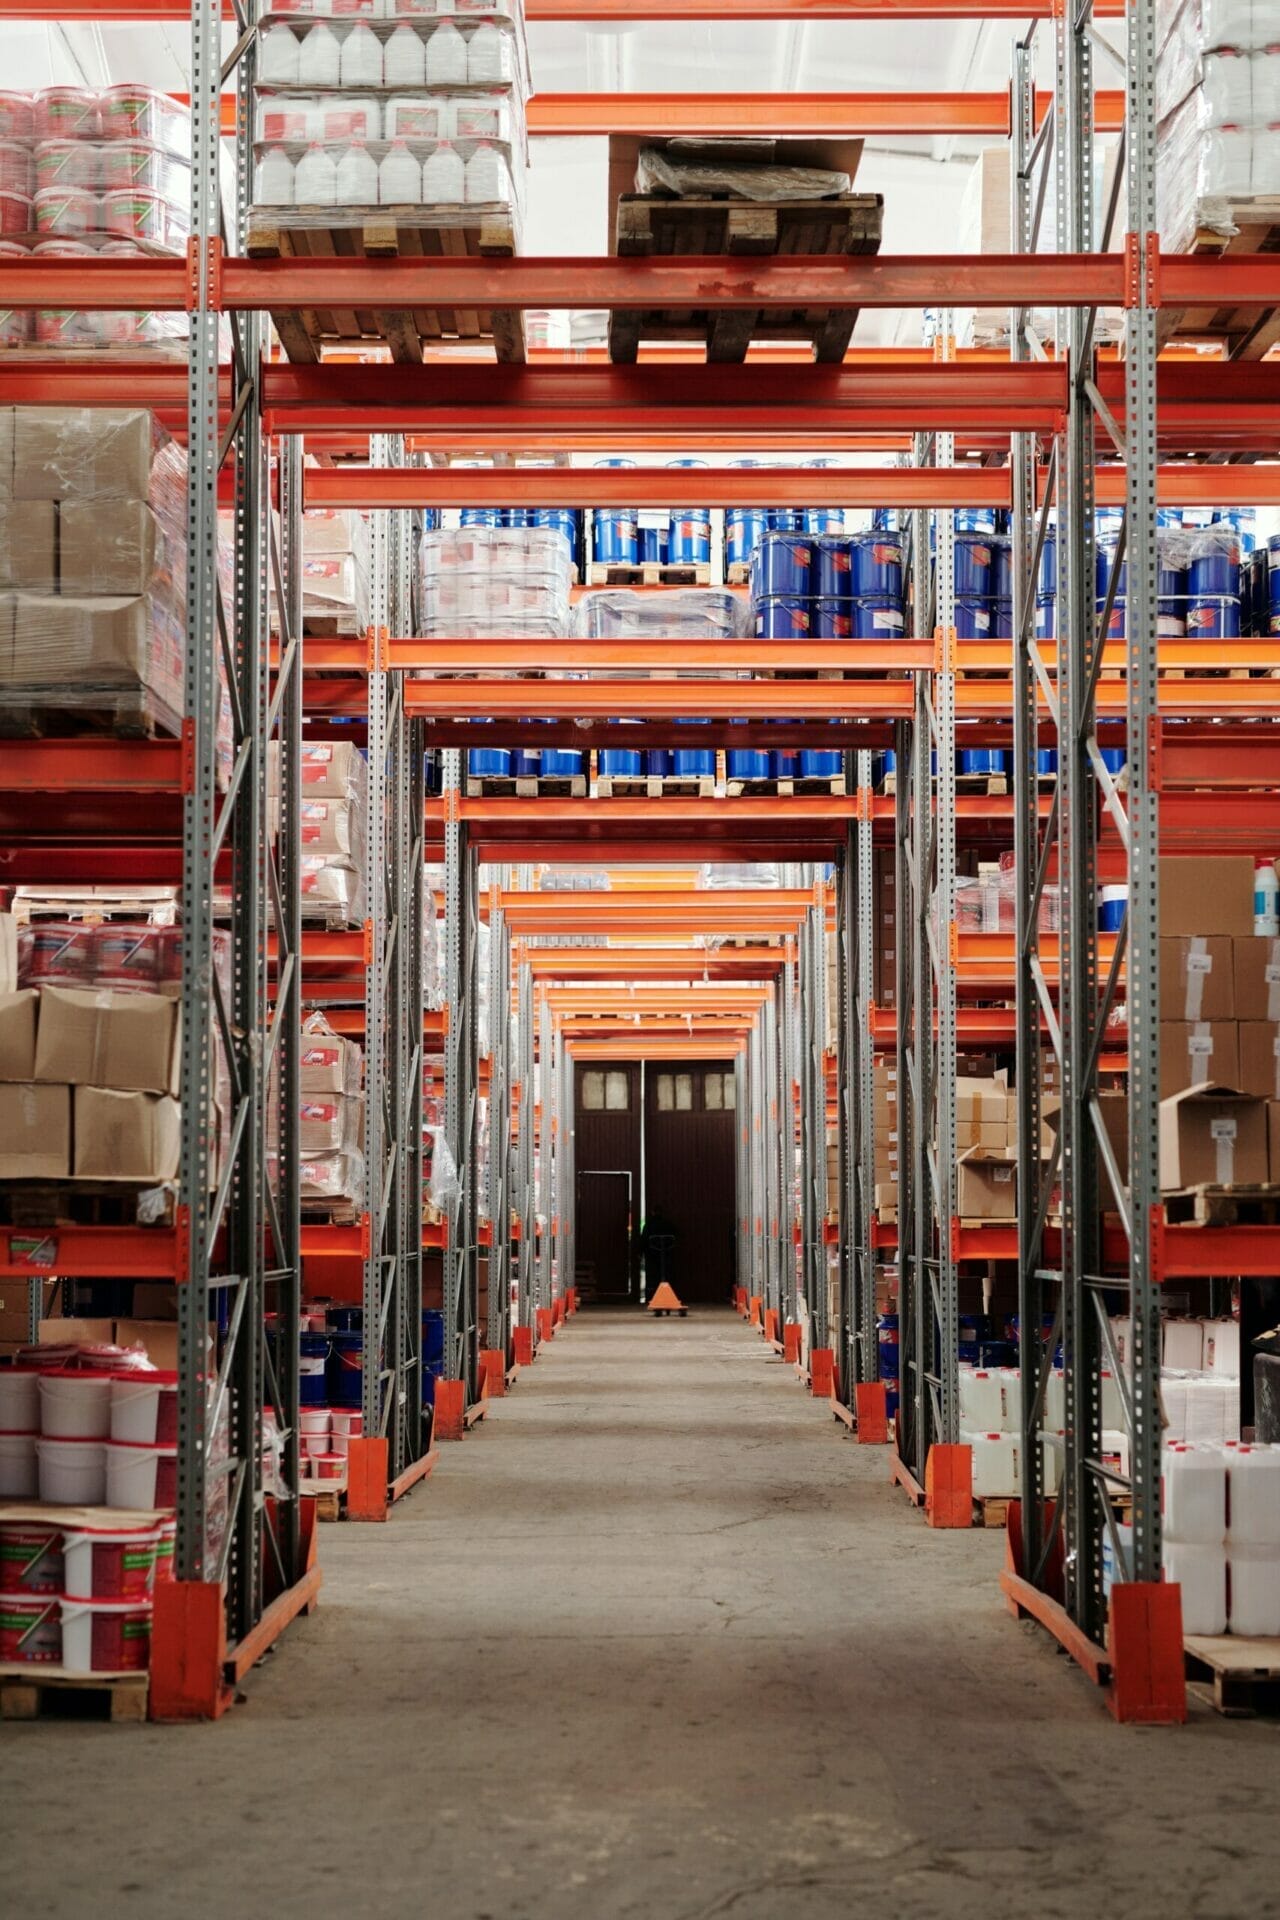 Fulfillment warehouse showing aisles of goods